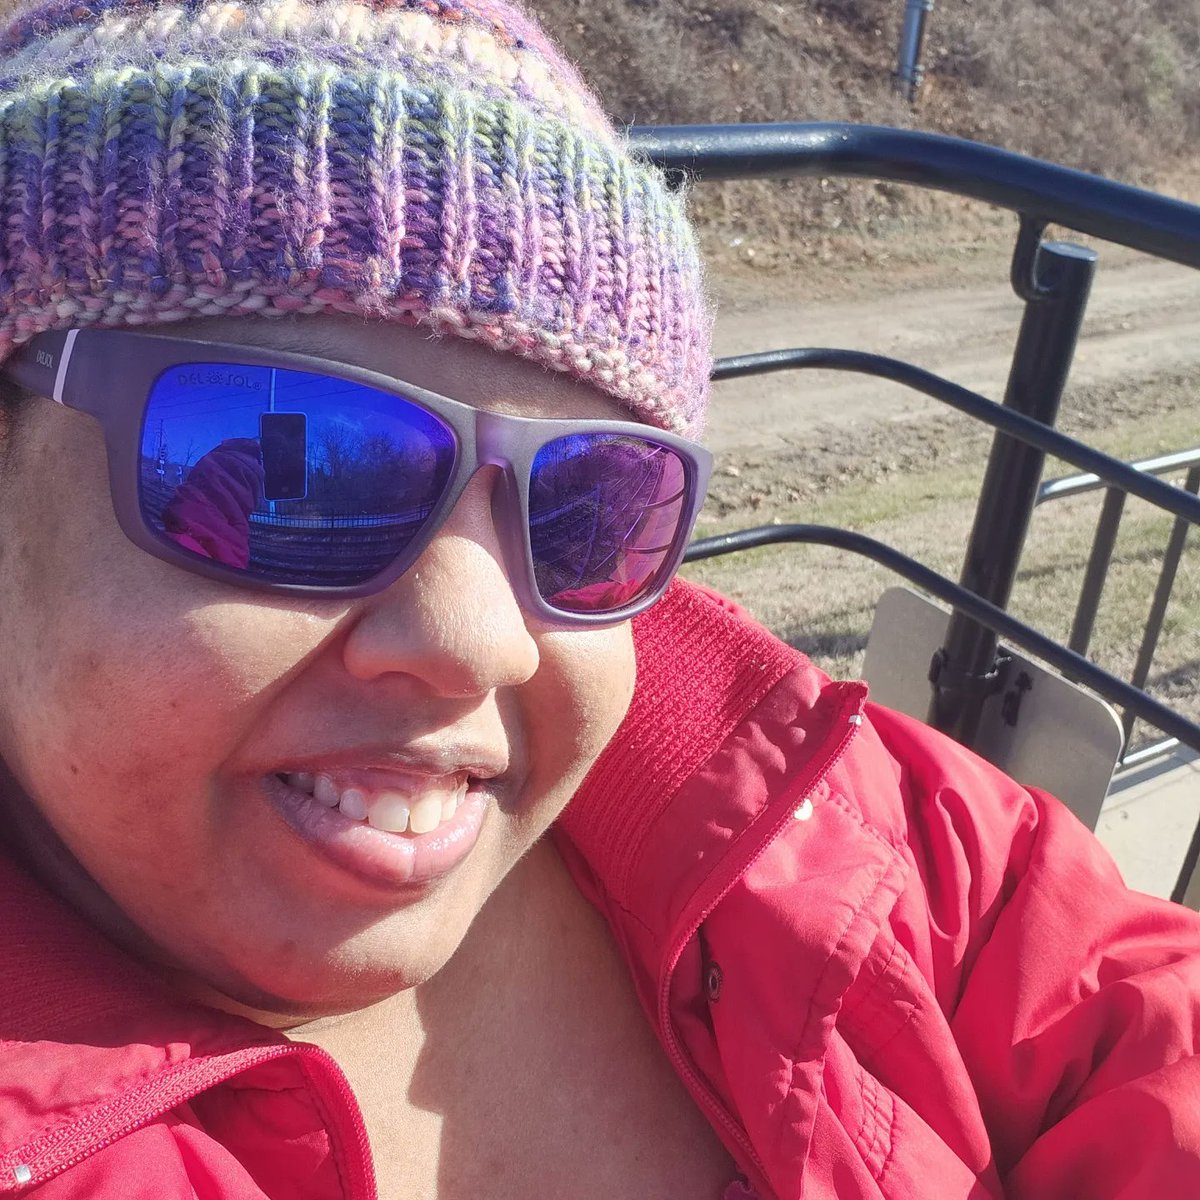 Looking good in my shades #businessowner #business #businesswoman #blkfollowtrain #blackfollowtrain #blackownedbusiness #blackbusinessowner #blackcontentcreator #blackwoman #blackbusiness #blackbeauty #blackcreator #disabled #disability #disabledwoman #disabledbusinessowner